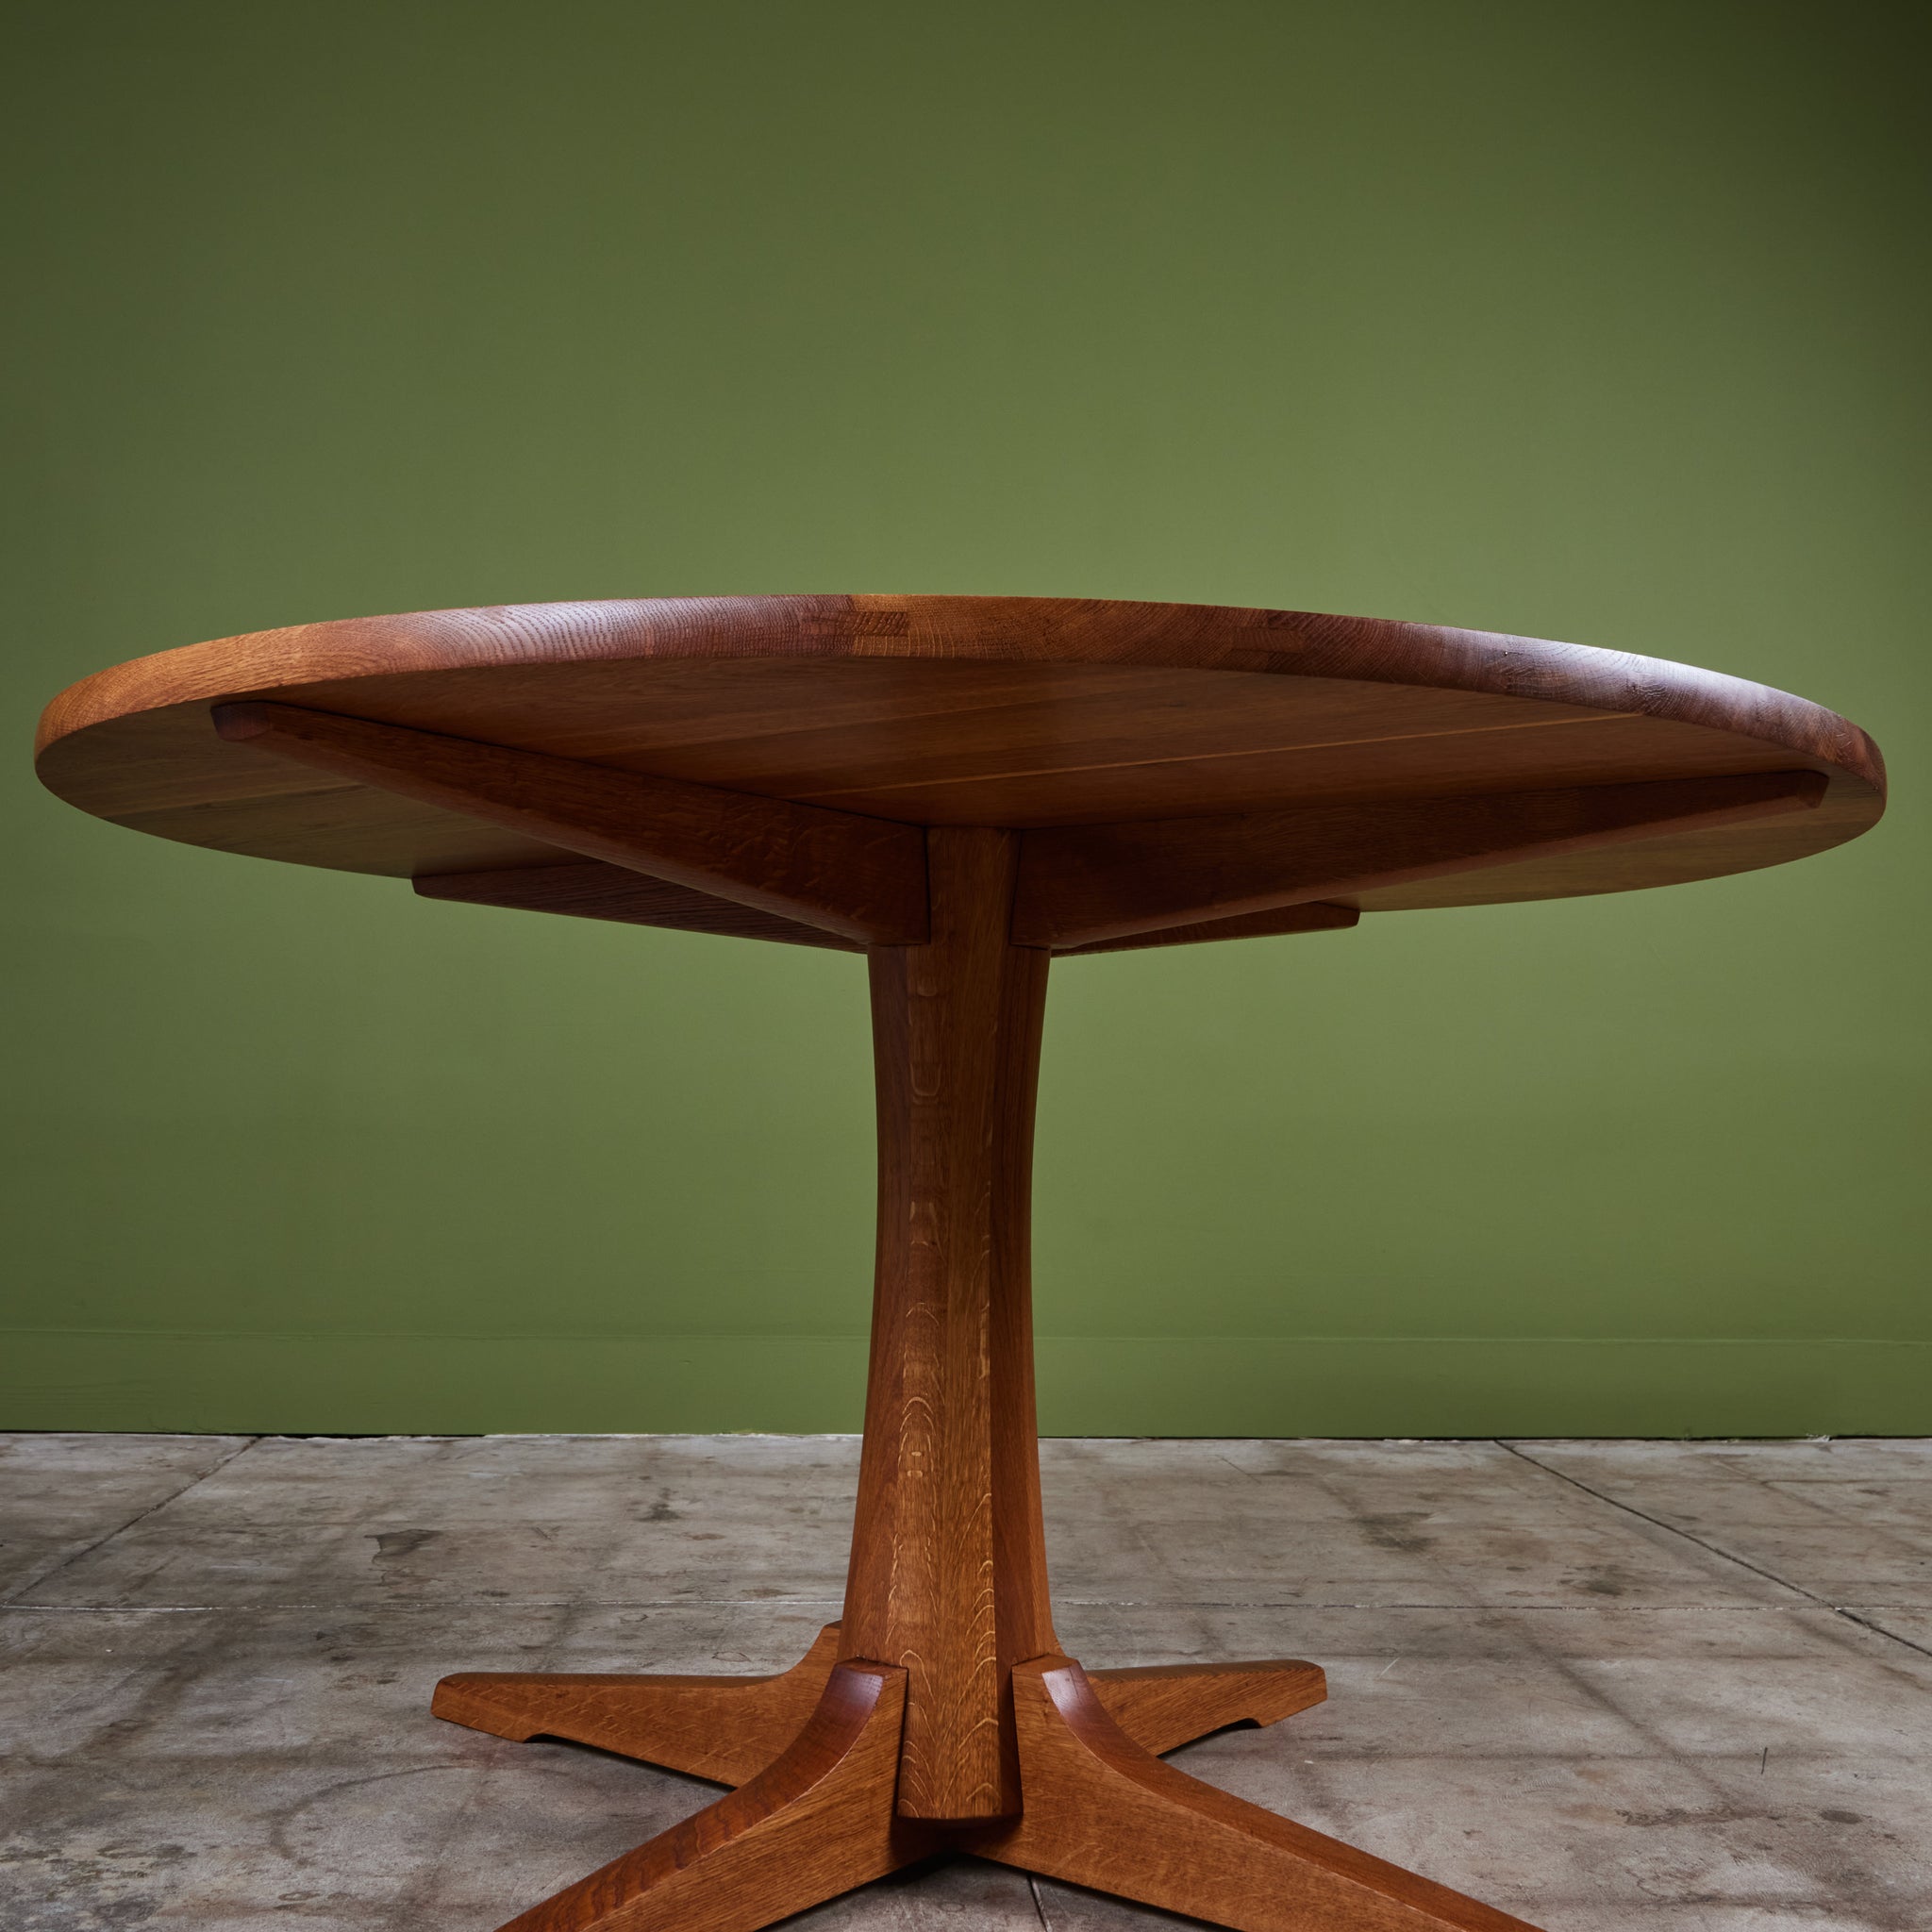 Jens H. Quistgaard Round Oak Dining Table